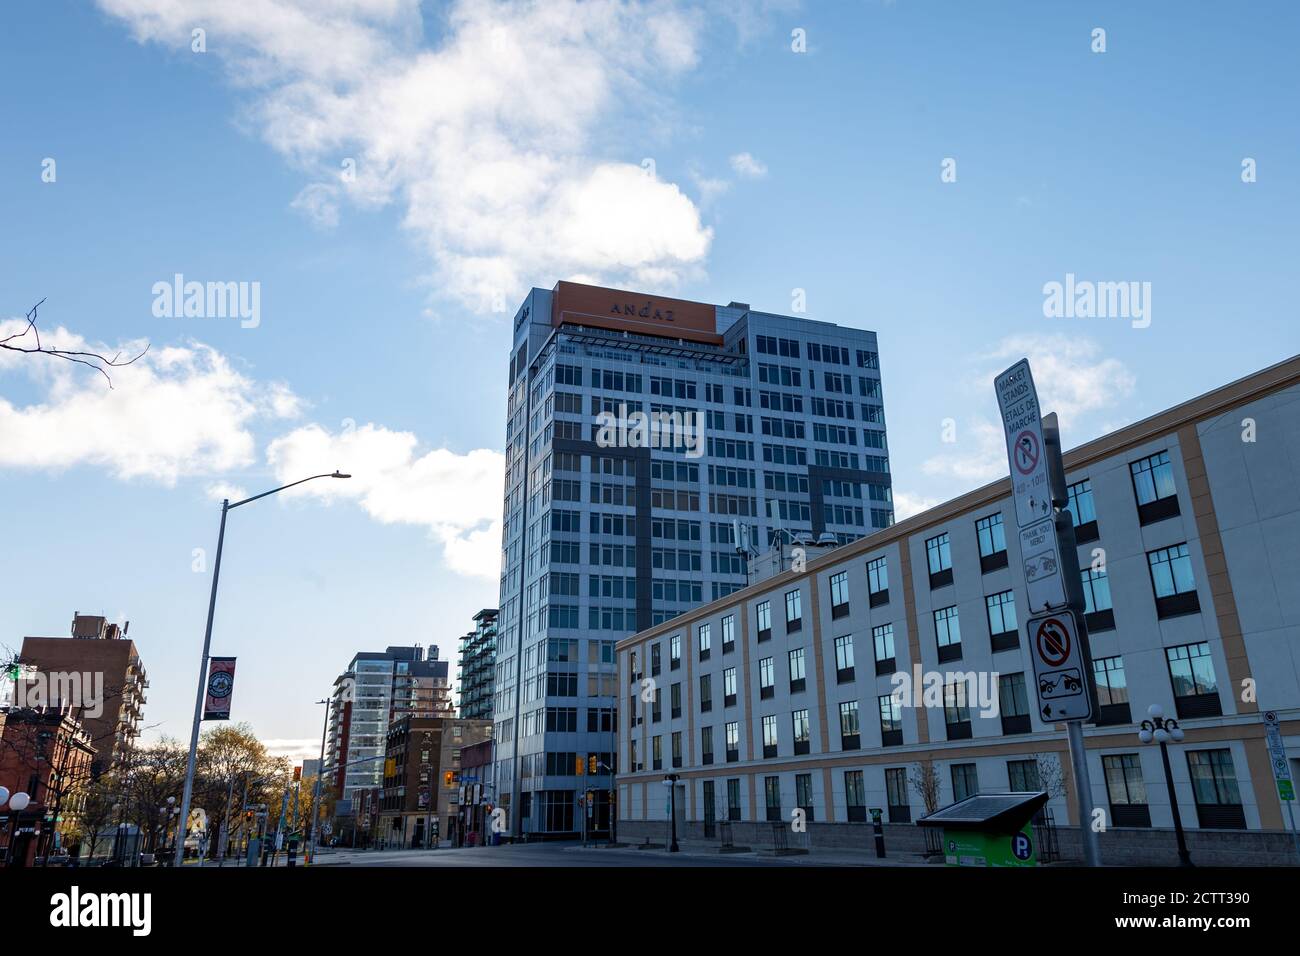 The Andaz Hotel in the ByWard Market district of Ottawa, Ontario, Canada in May 2020. Stock Photo